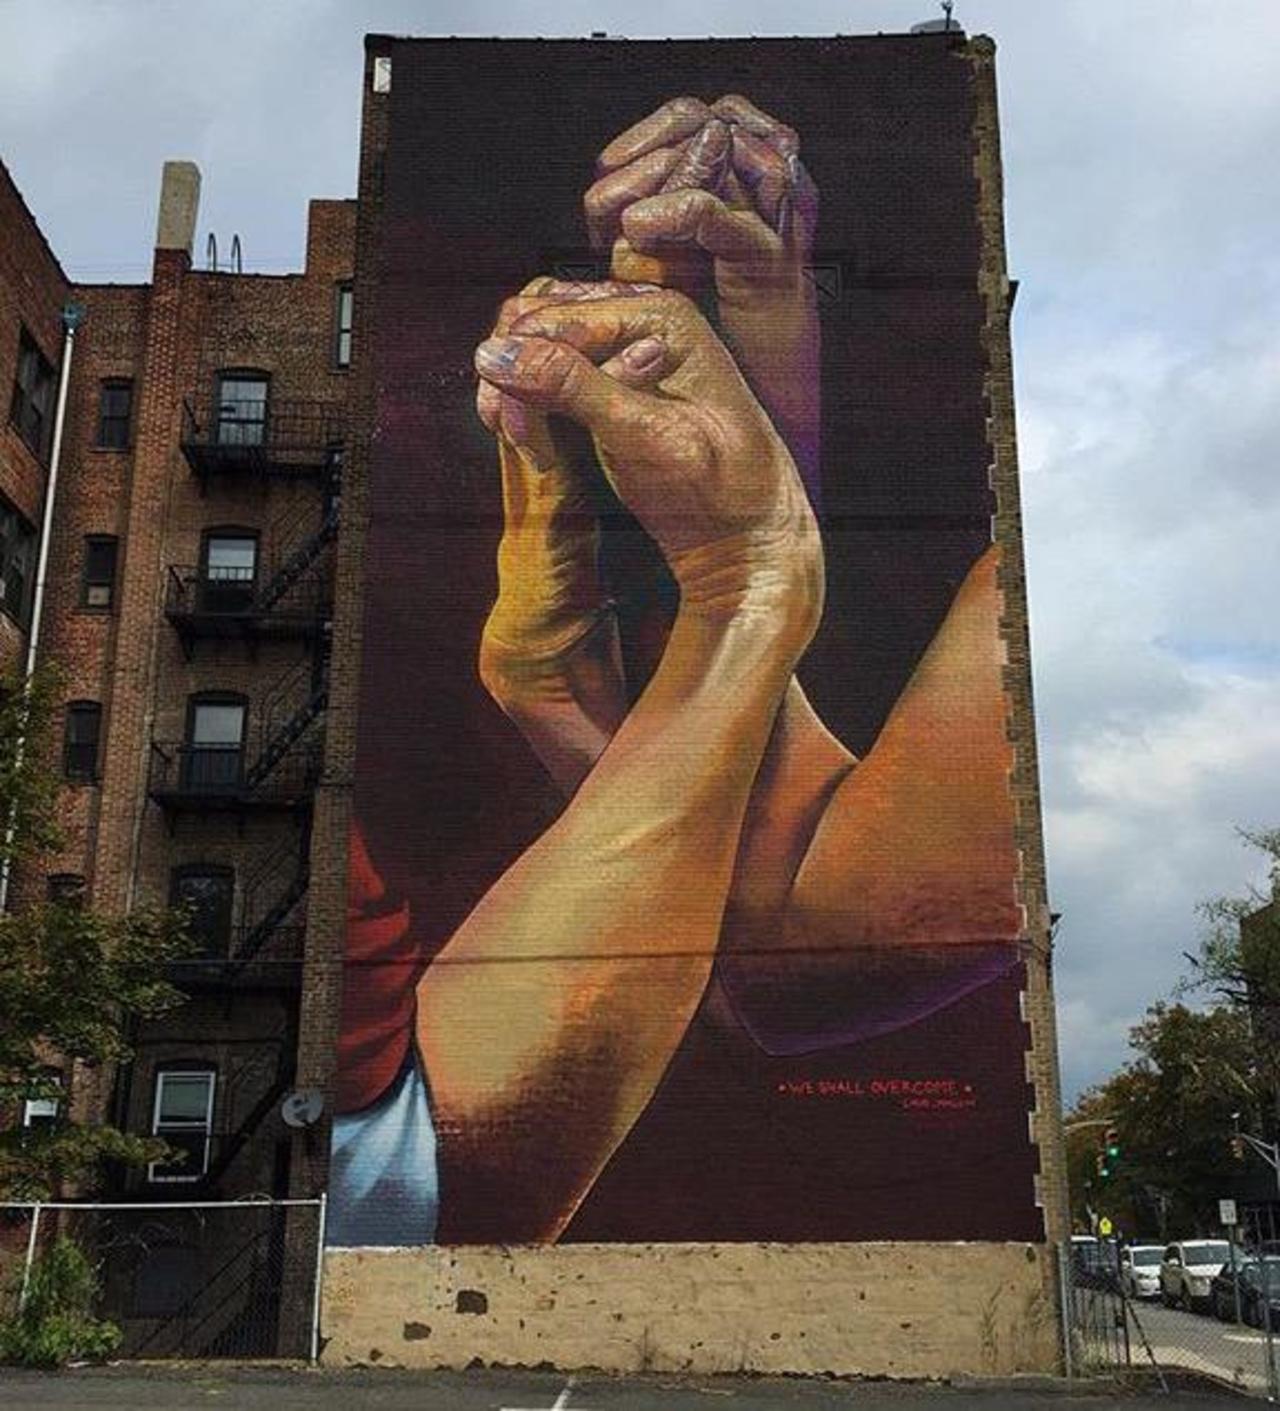 New Street Art by CaseMaclaim in Jersey City for the TheBKcollective 

#art #graffiti #mural #streetart http://t.co/WW9gGmDxtJ